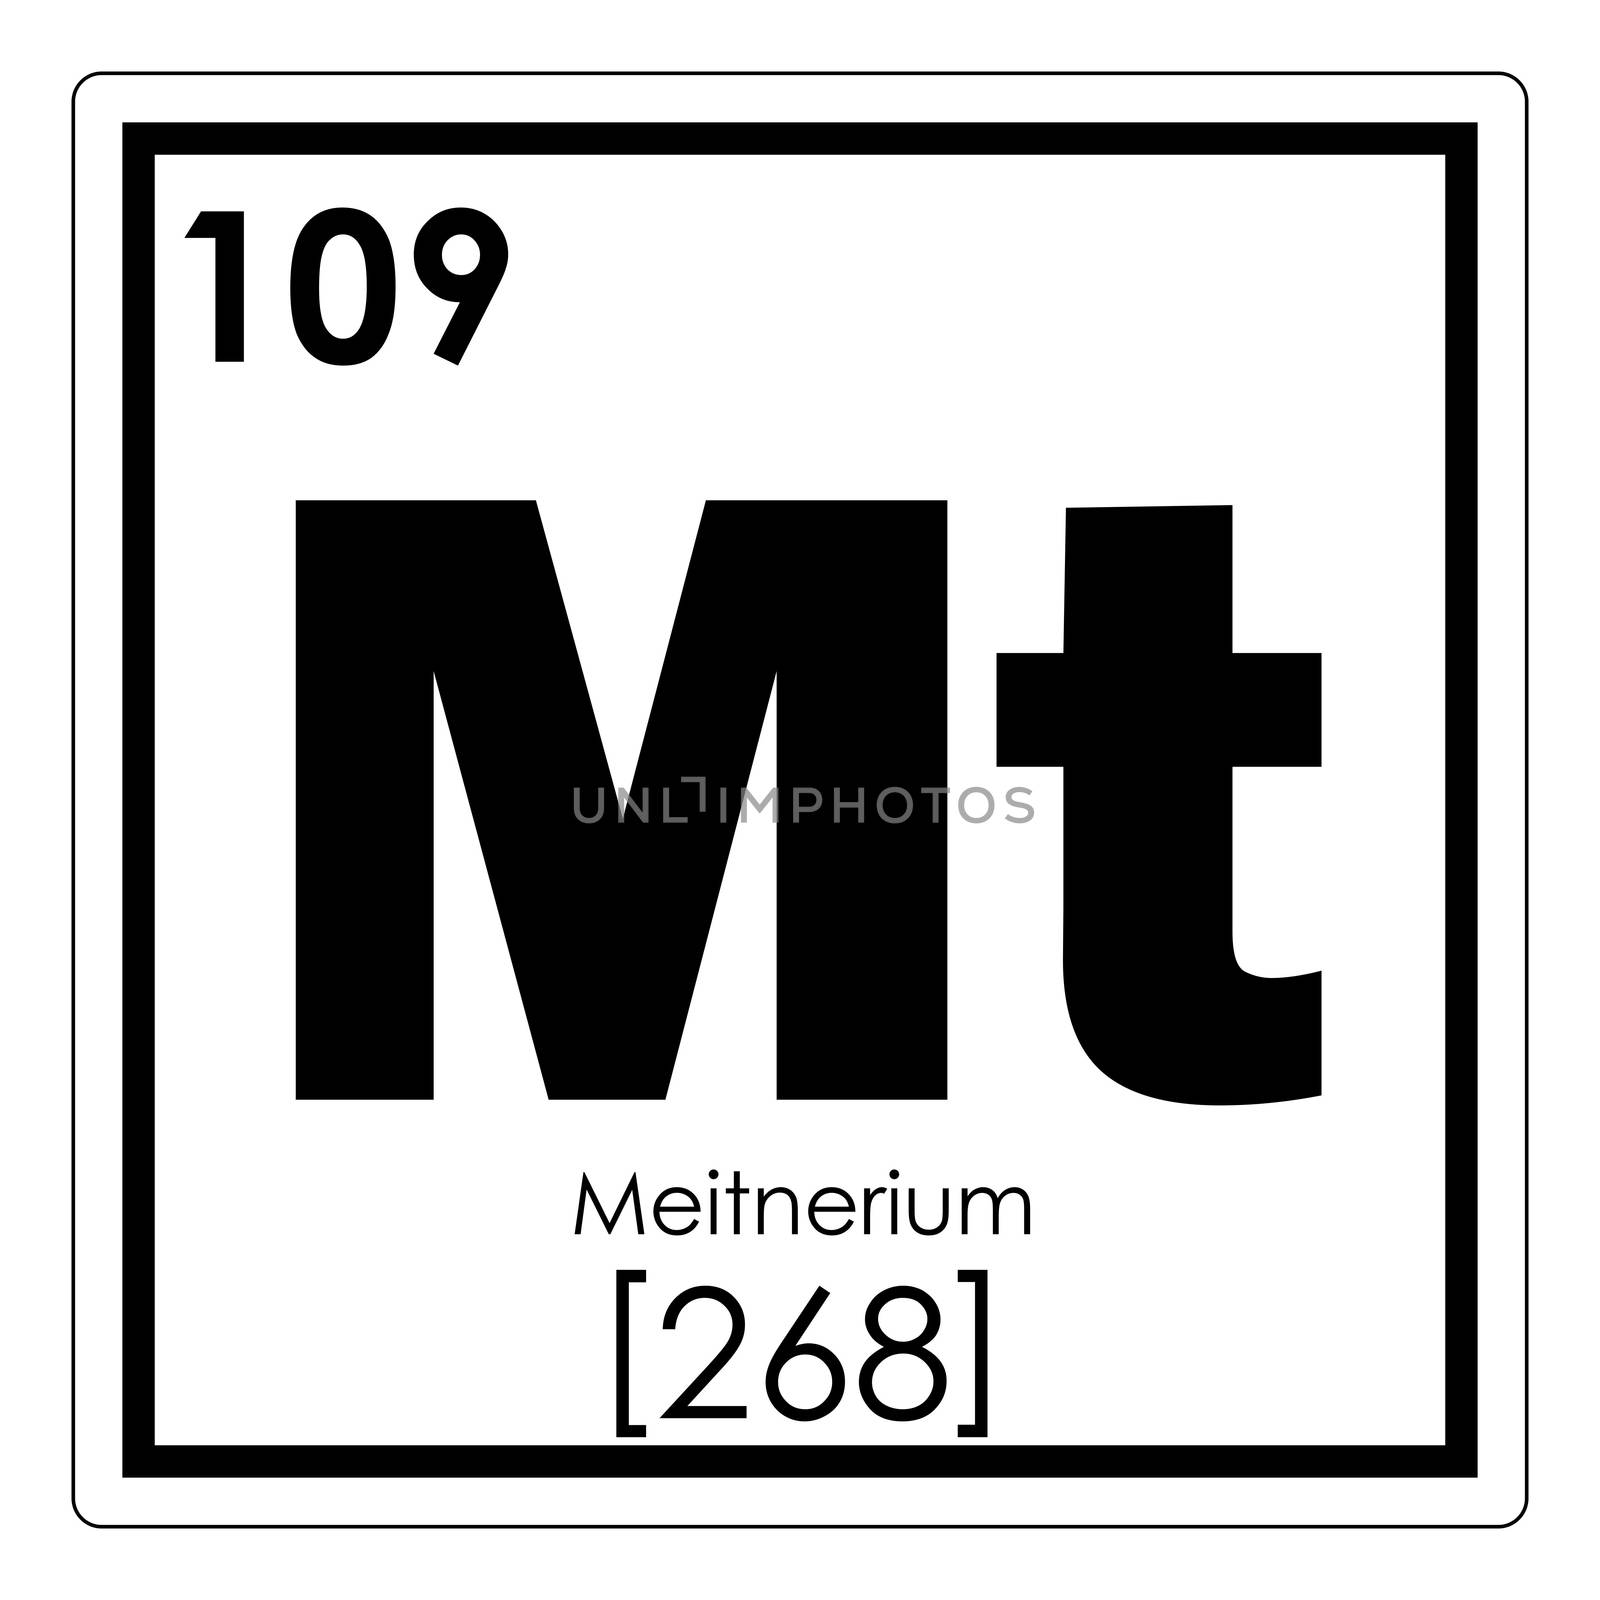 Meitnerium chemical element by tony4urban